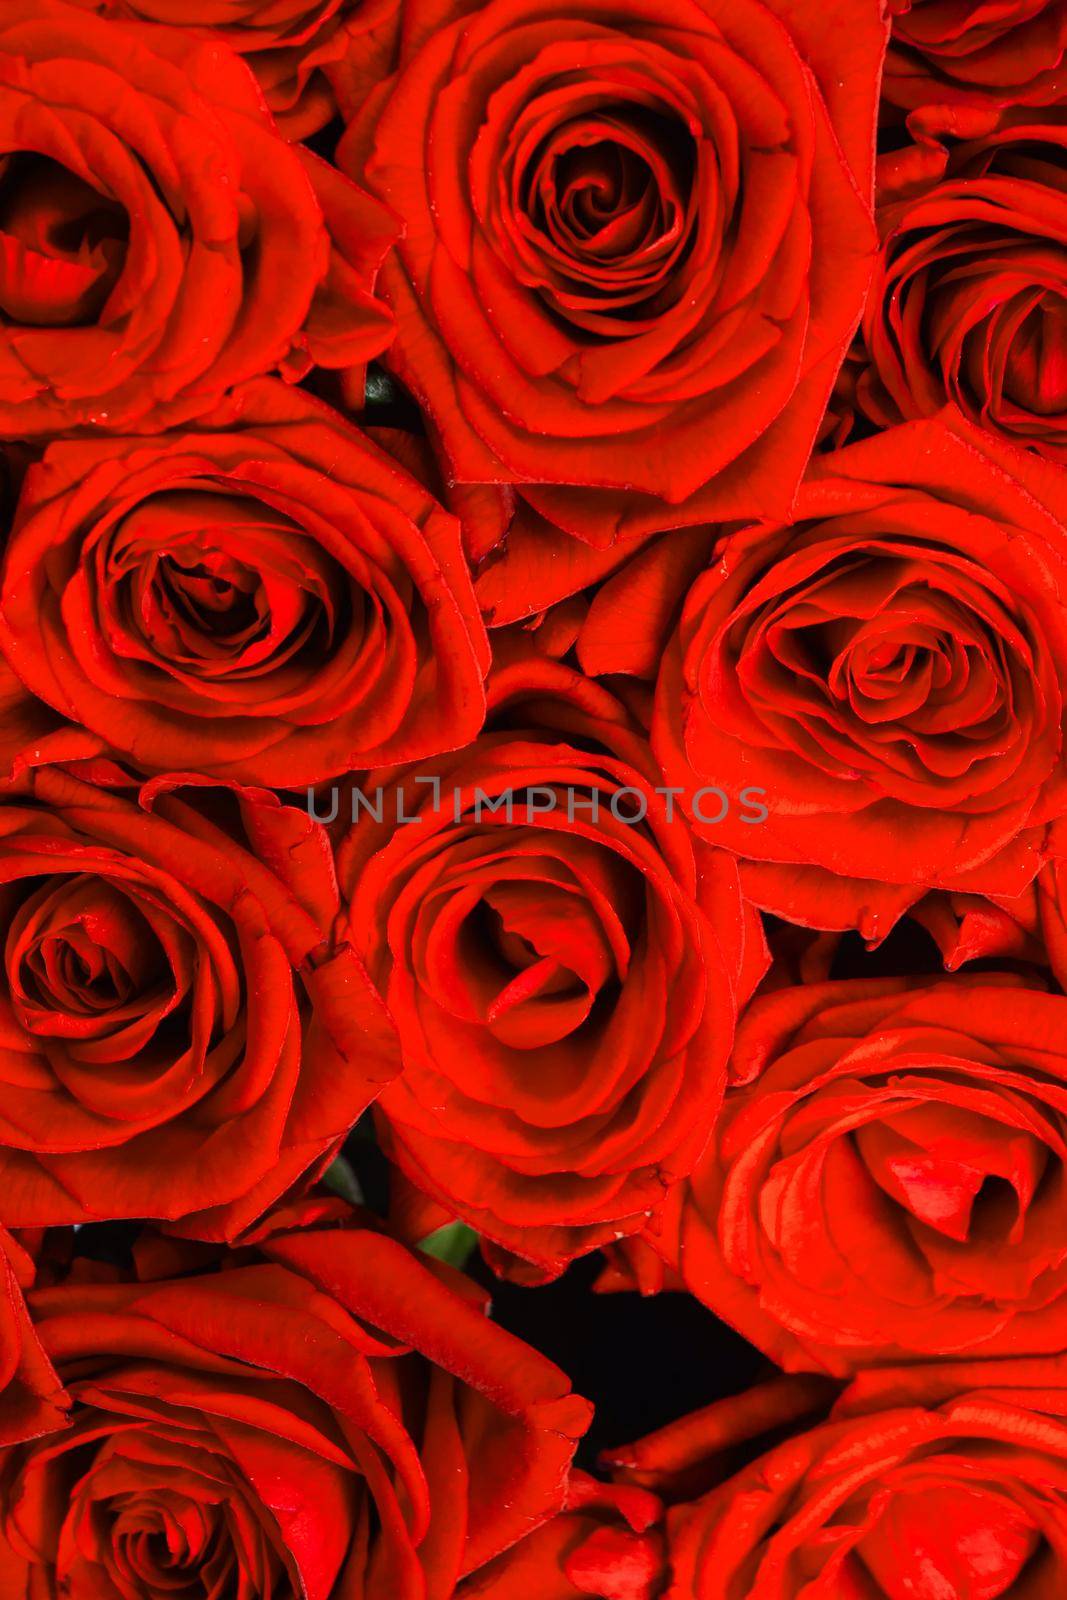 A lot of red roses background, Valentines day gift concept